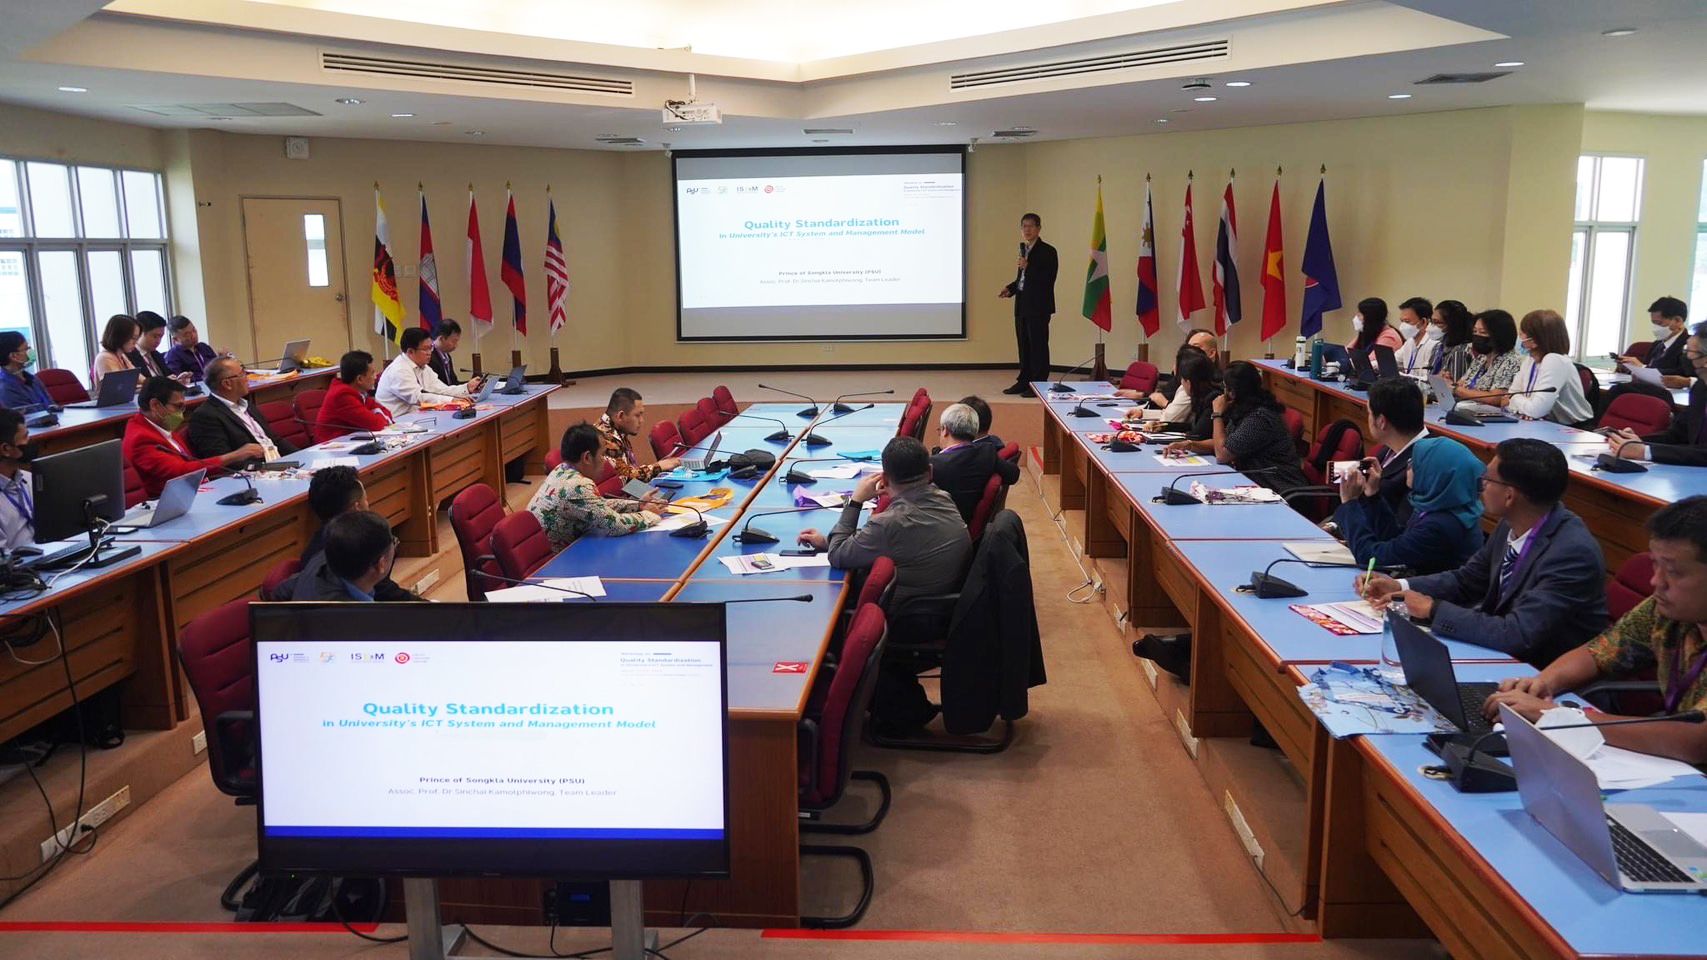 A Breakthrough on Digital Transformation for ASEAN HEI’s: Workshop on Quality Standardization in University’s ICT System and Management